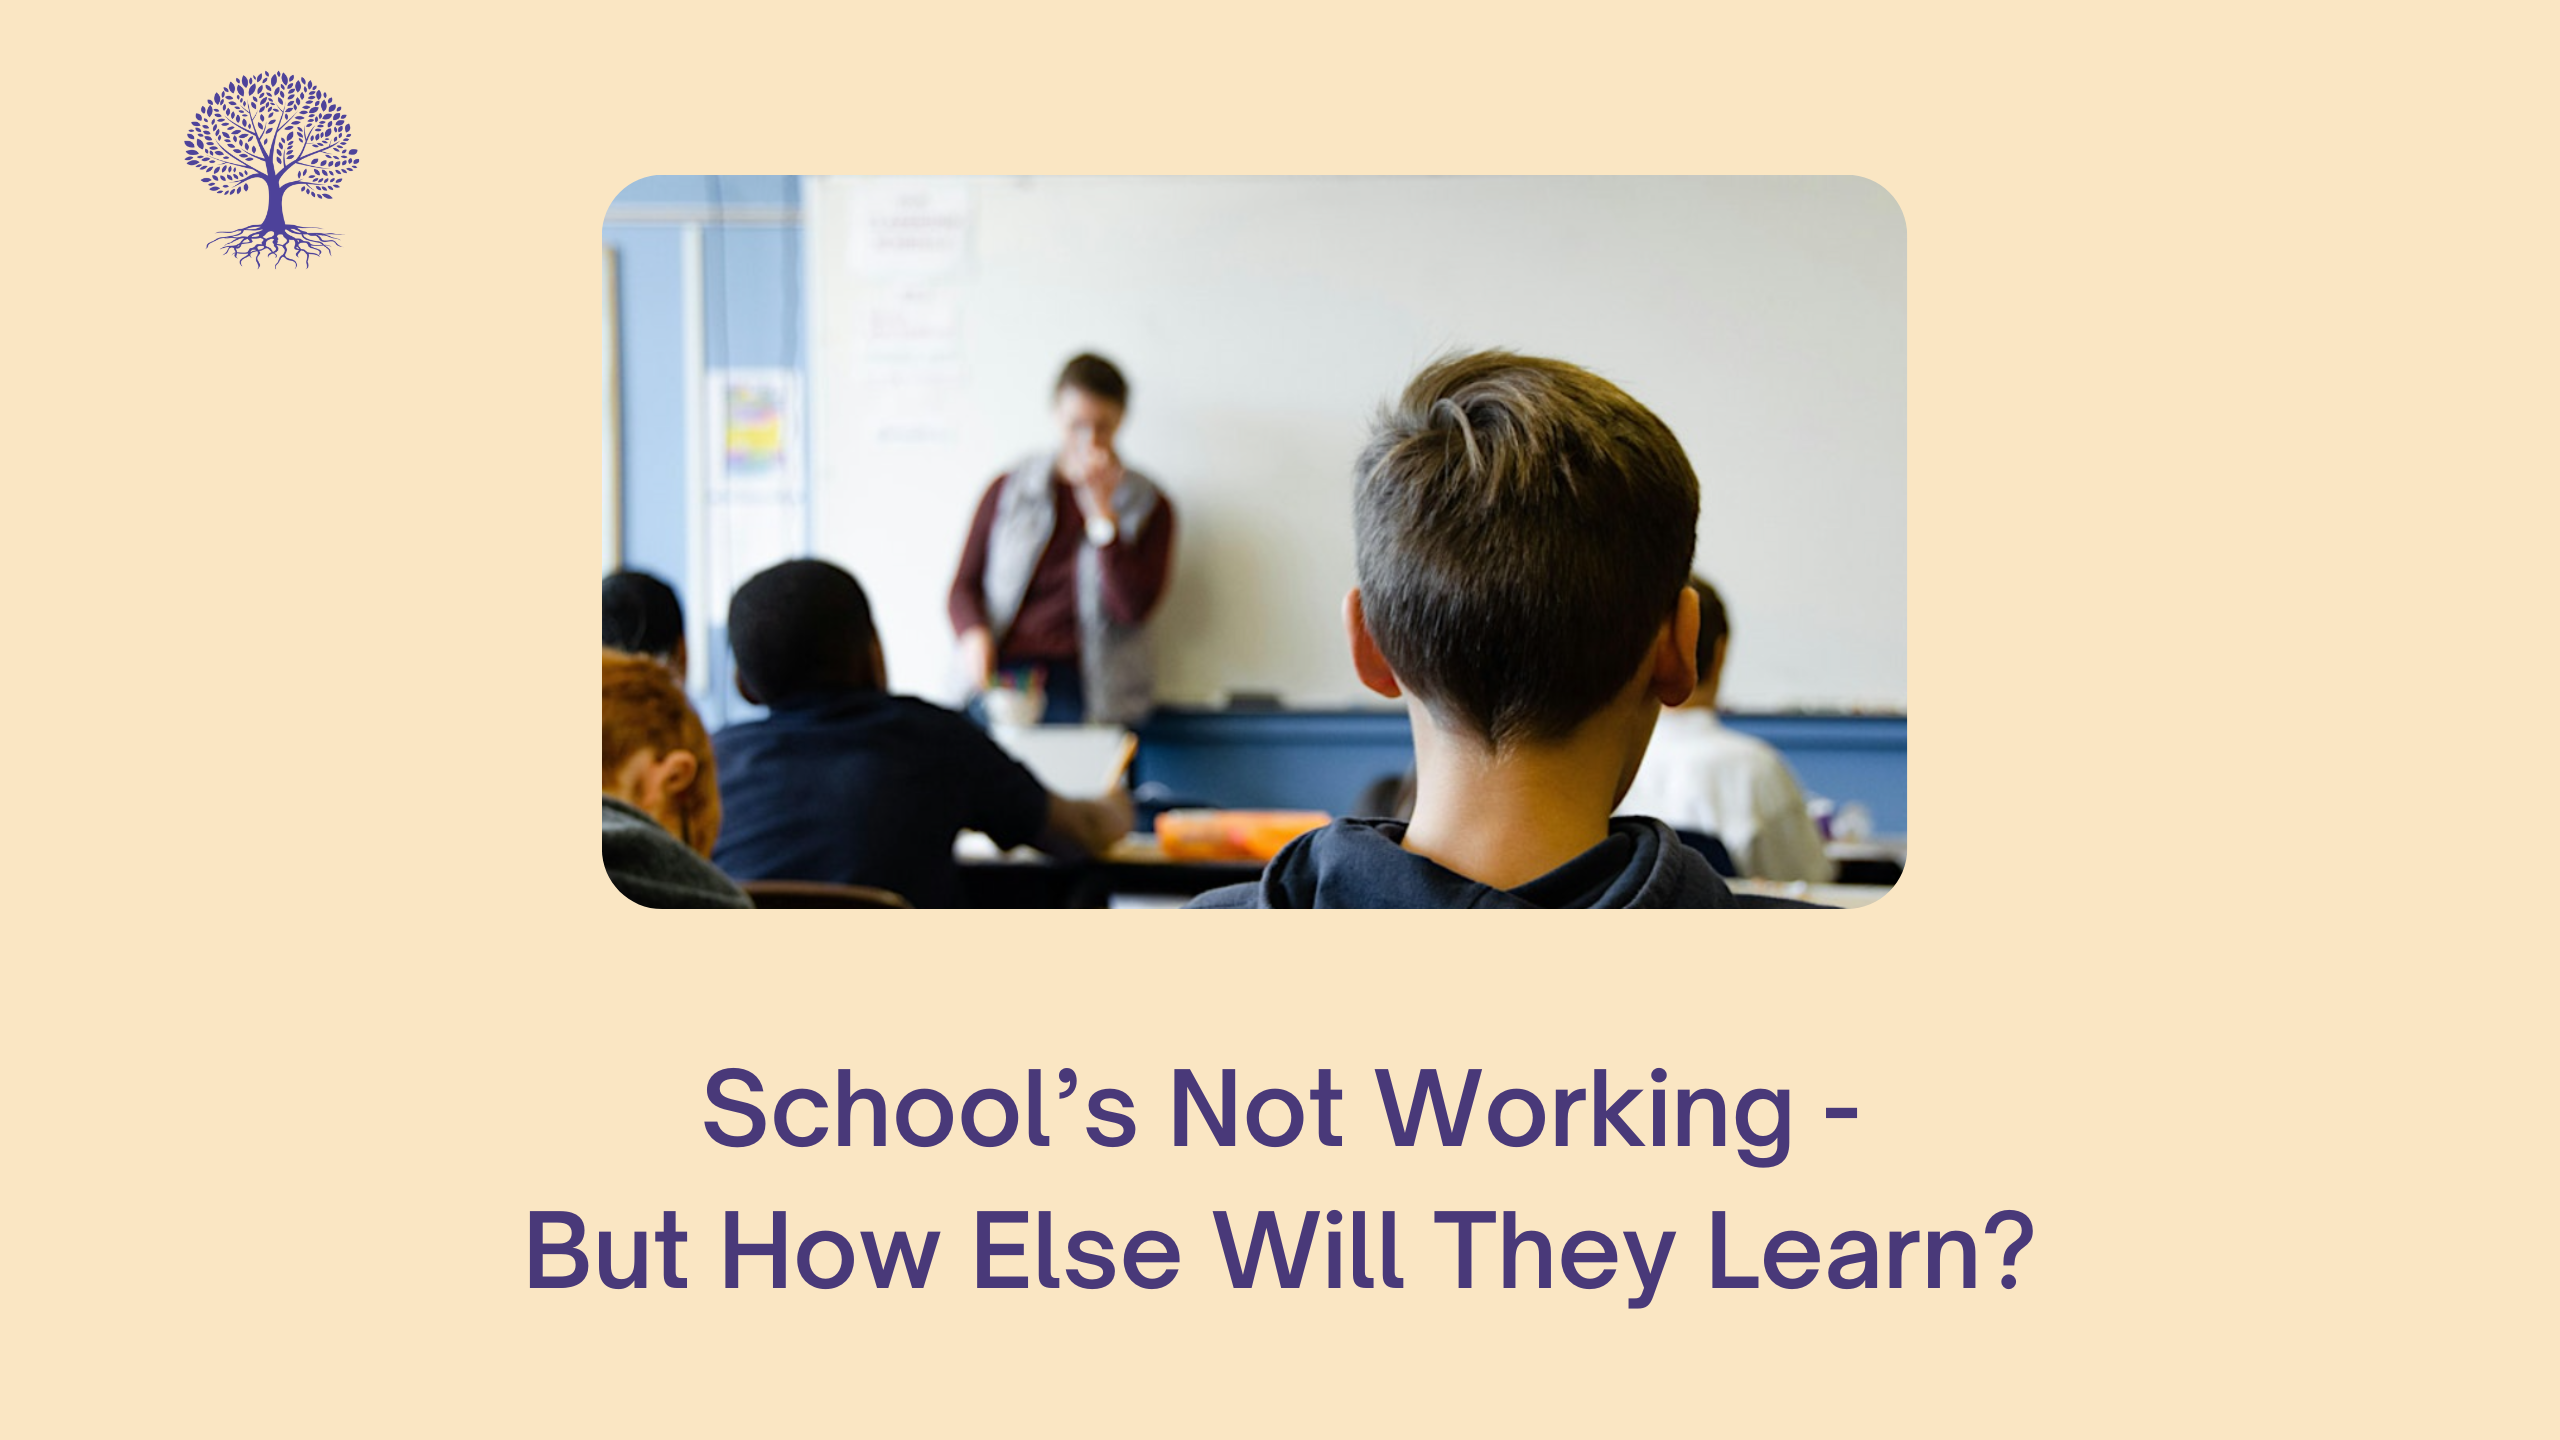 School's Not Working - But How Else Will They Learn?